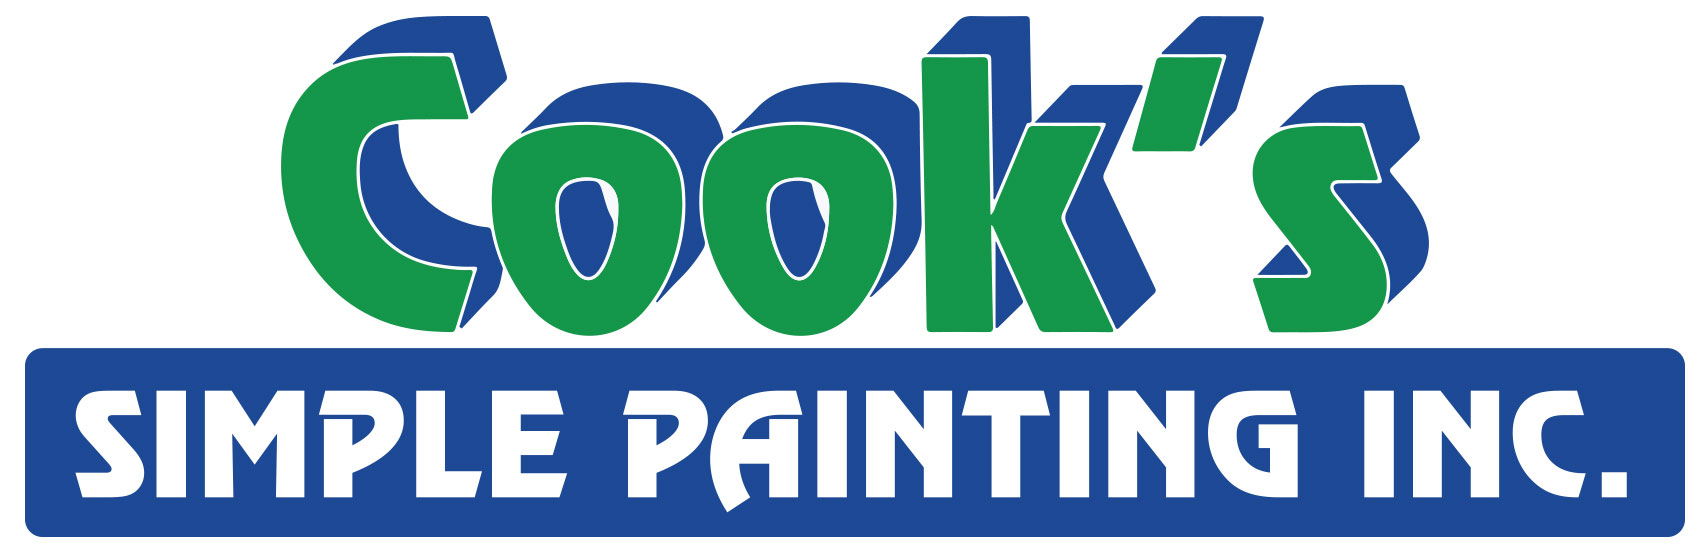 Cook's Simple Painting Inc.